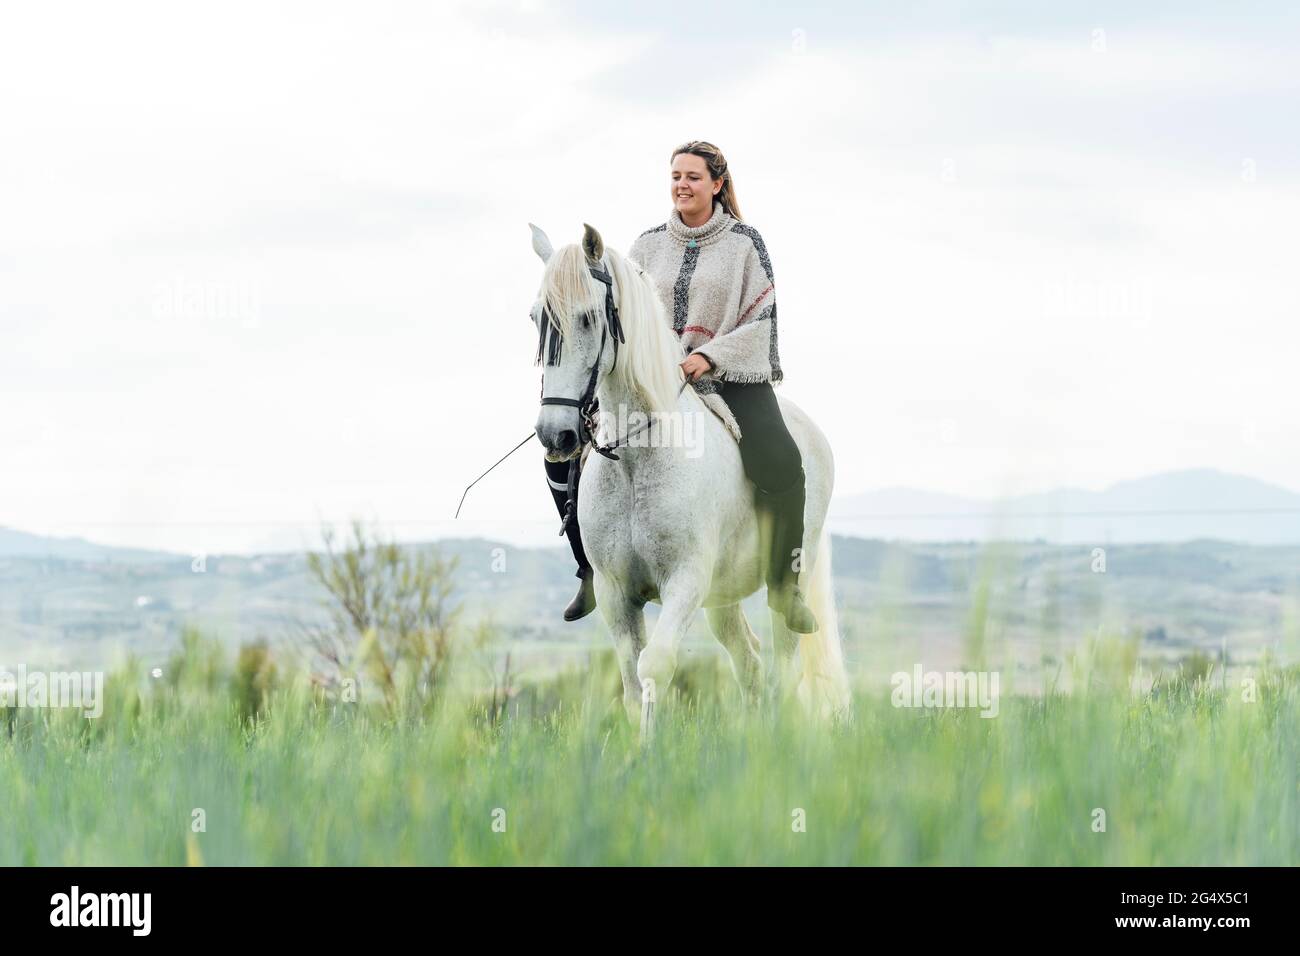 Smiling young woman riding horse at countryside Stock Photo